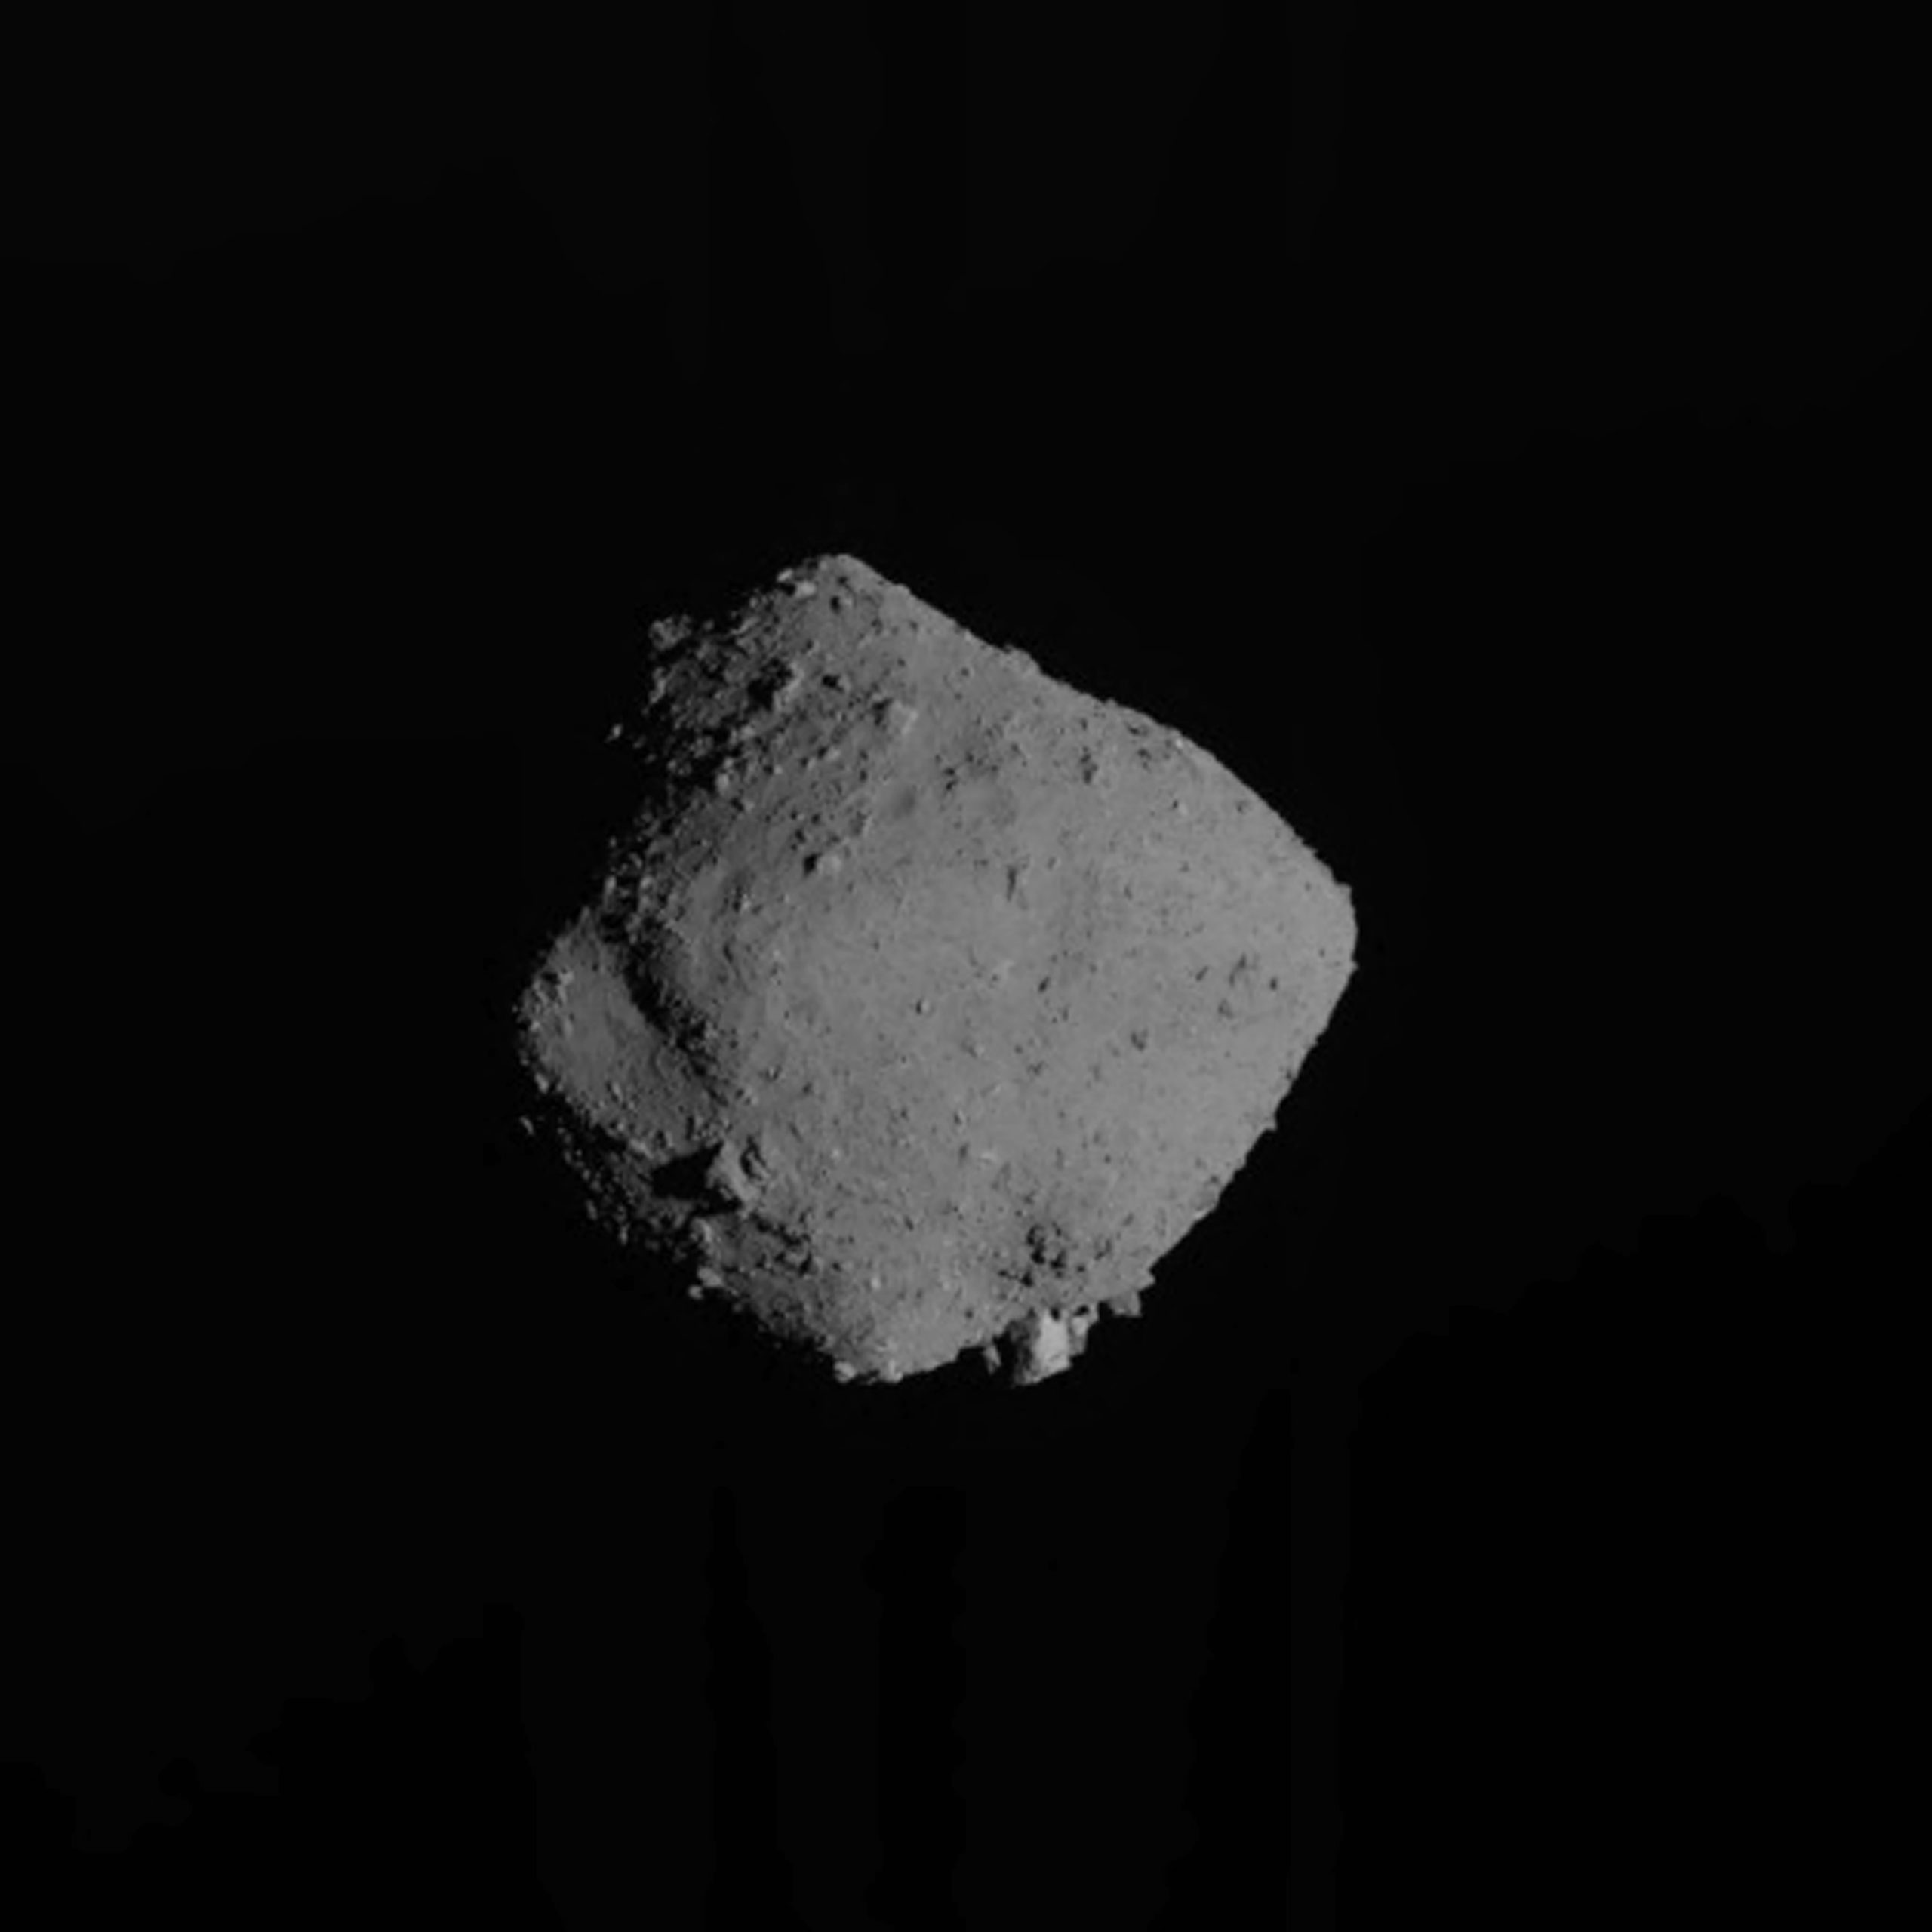 A picture of Ryugu taken by the station immediately after turning on the engines. Credit: JAXA